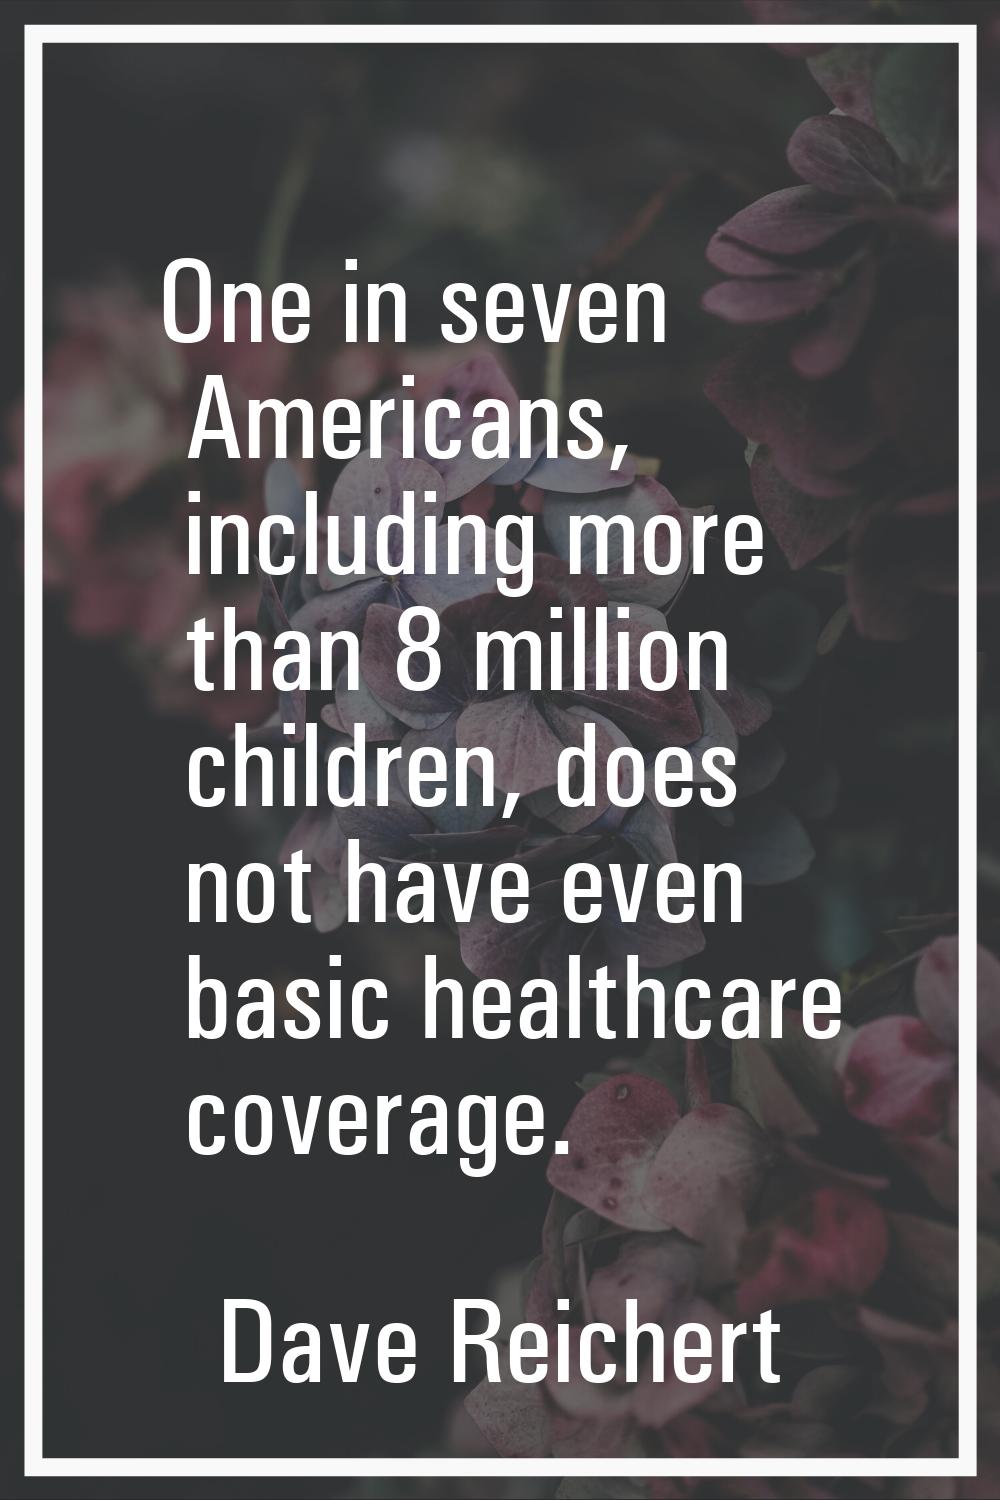 One in seven Americans, including more than 8 million children, does not have even basic healthcare